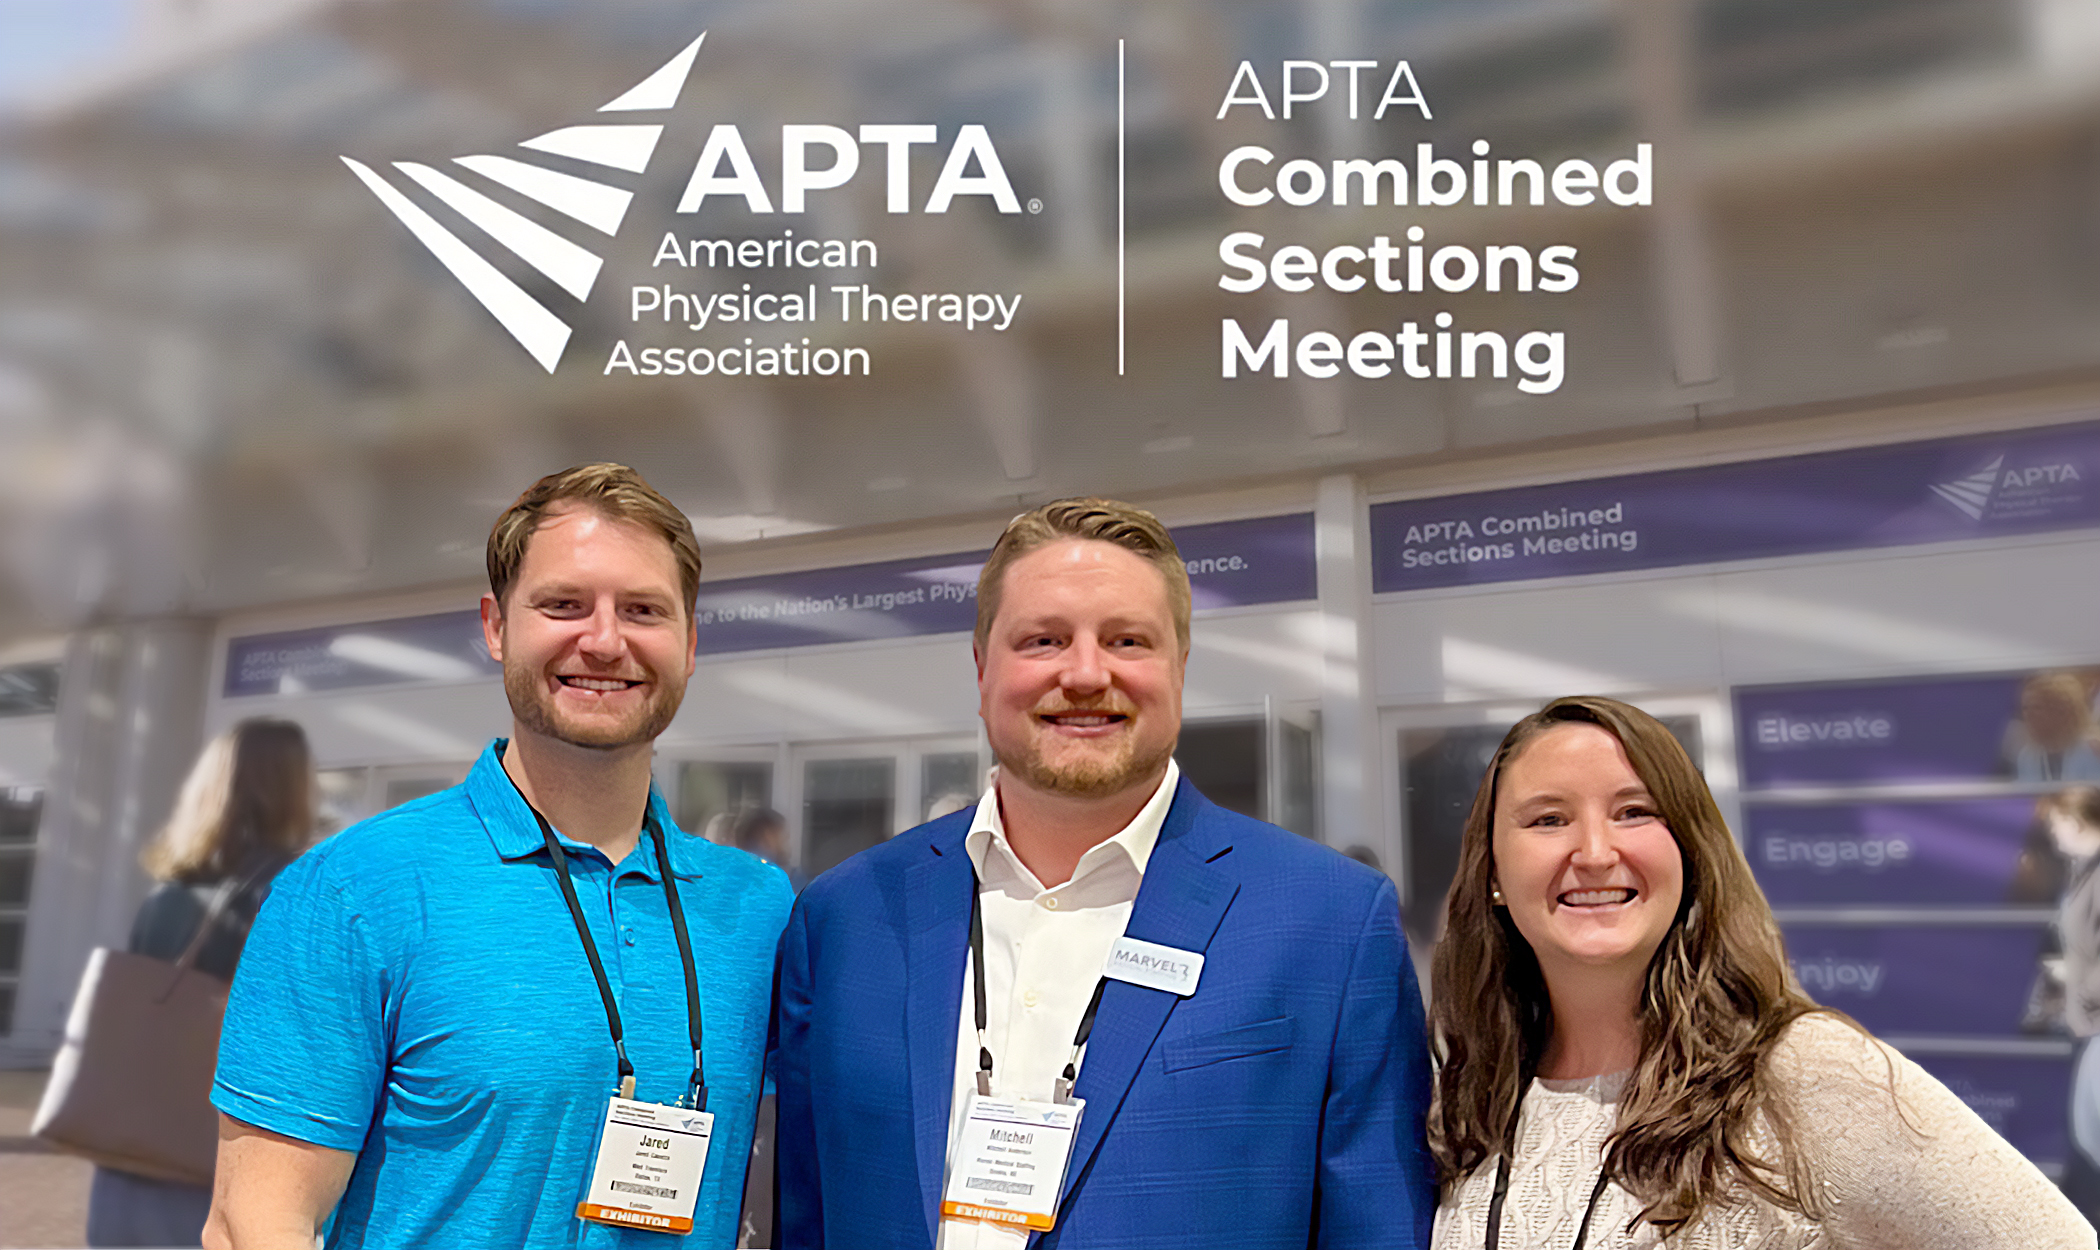 Our Therapy member with Travel Therapy Mentors at APTA CSM